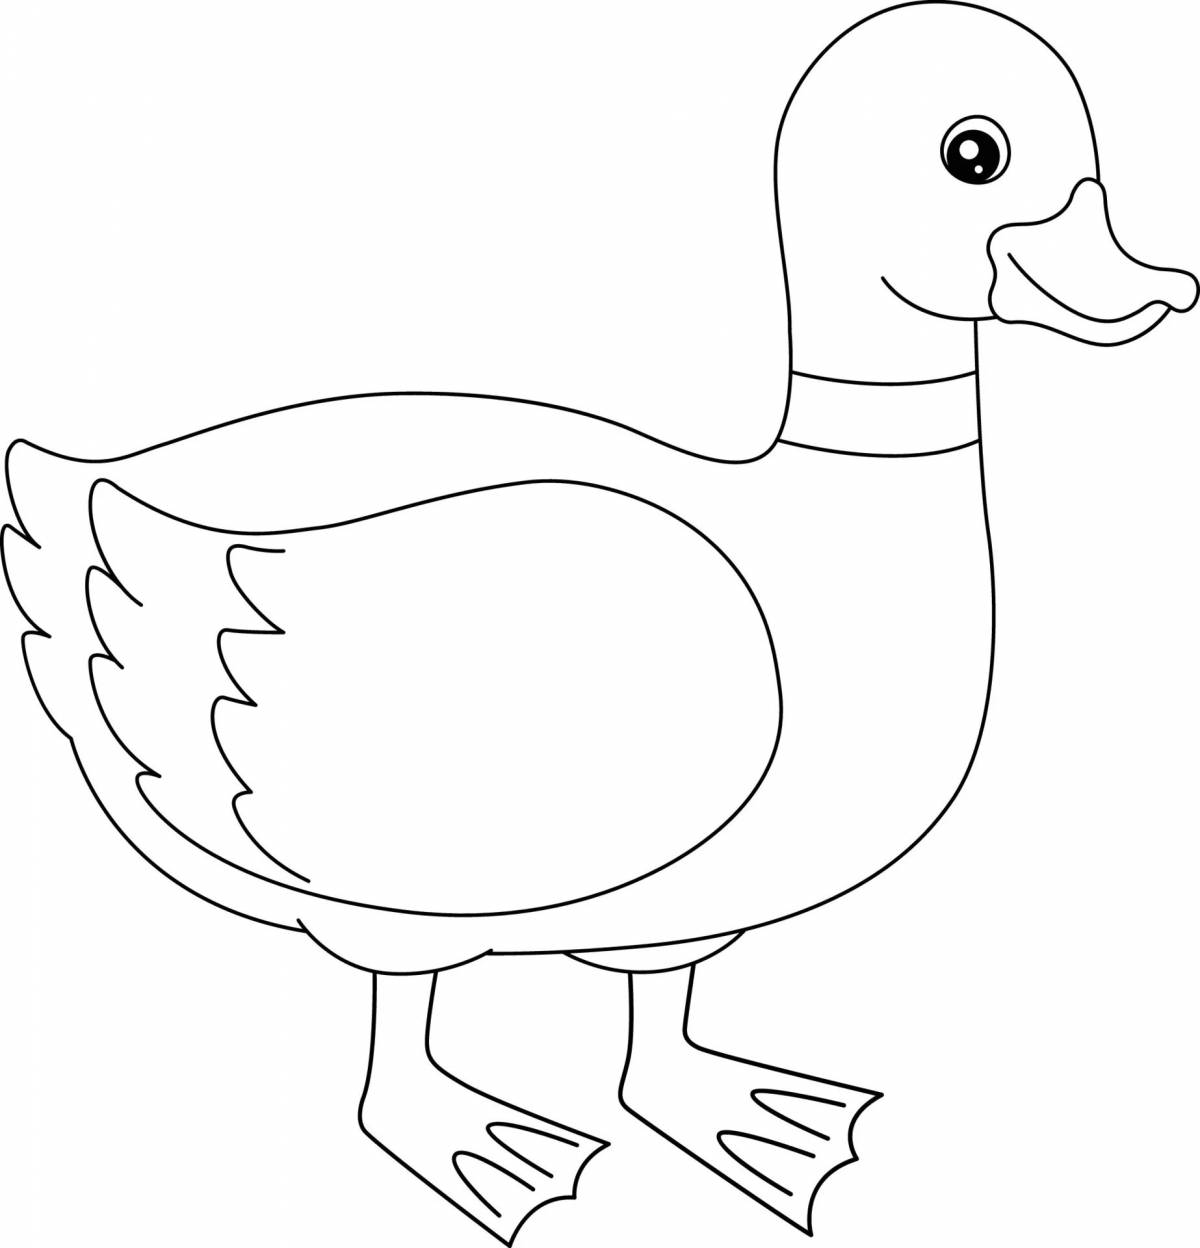 Animated lalafoe duck coloring page